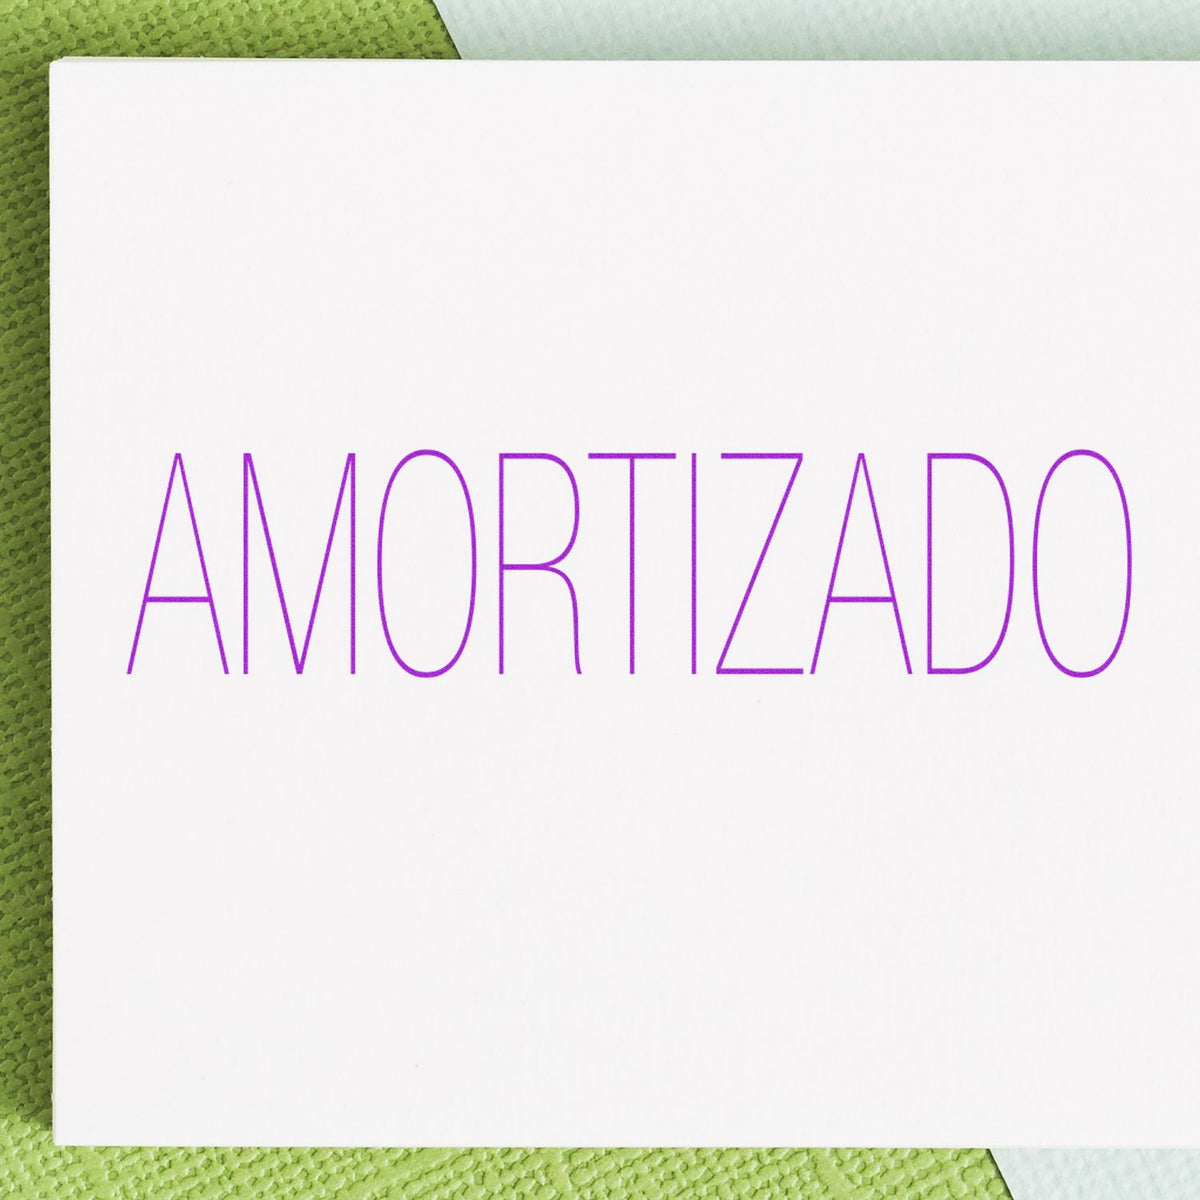 Amortizado Rubber Stamp In Use